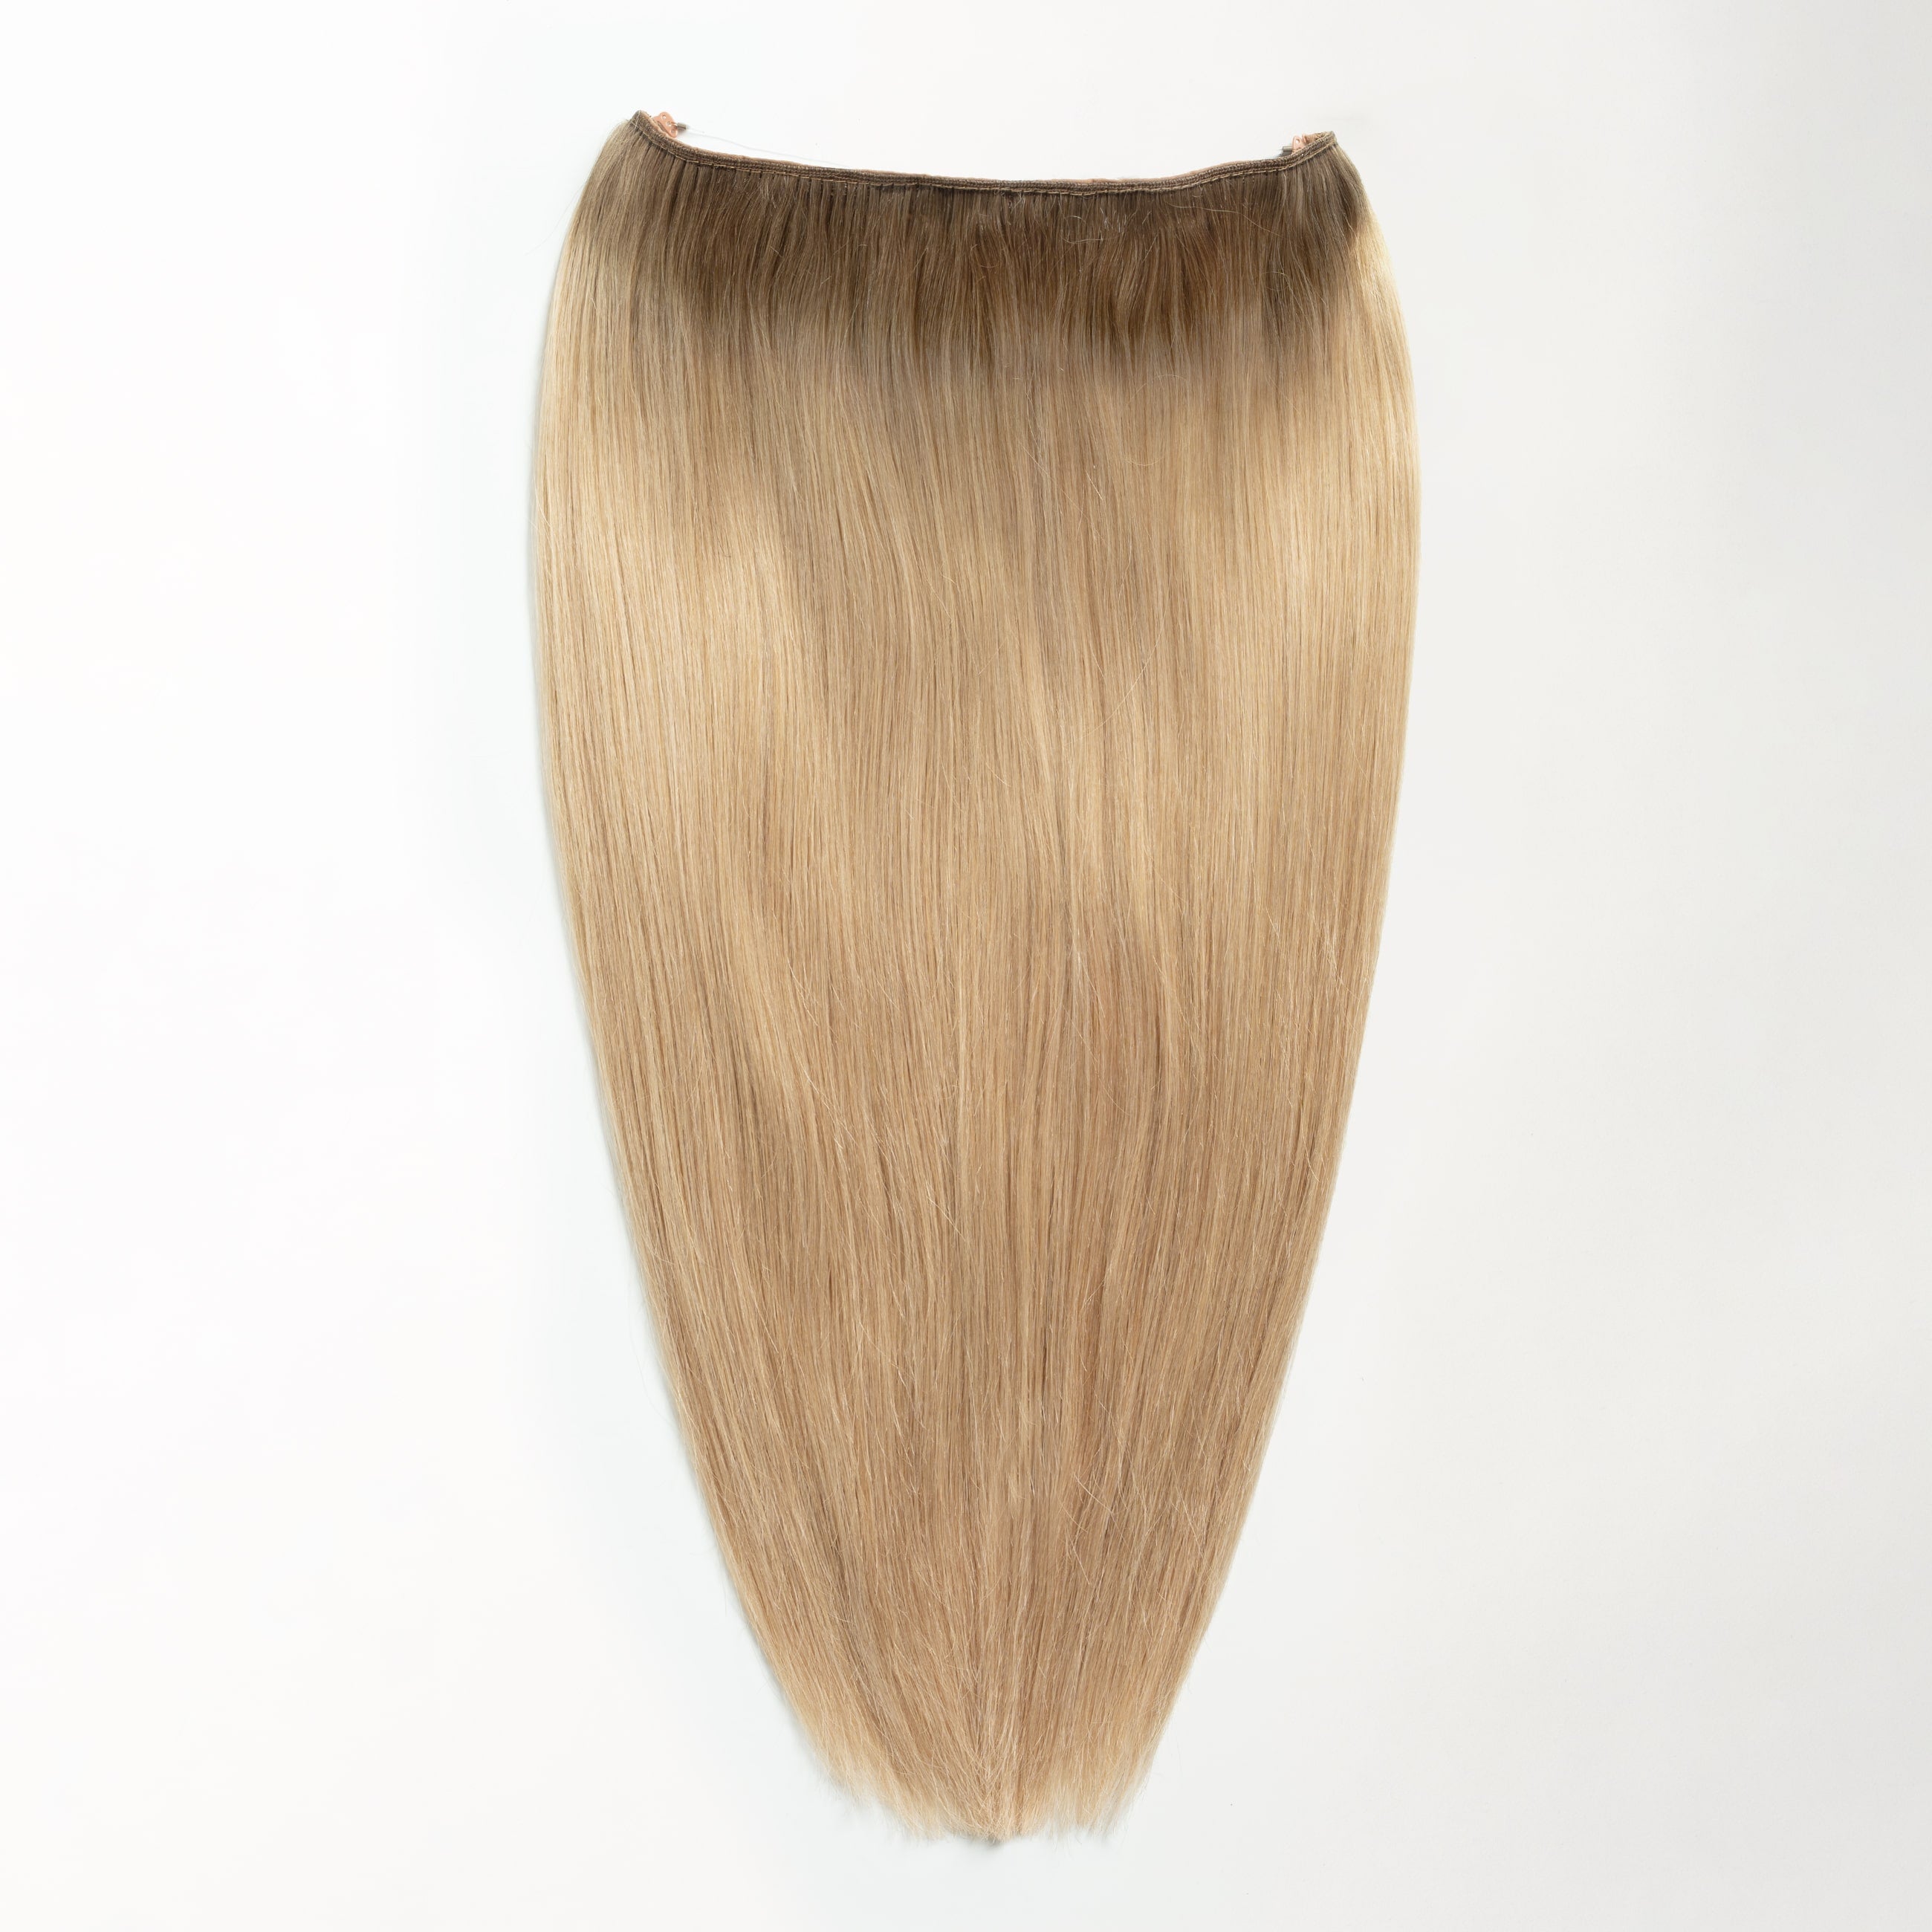 Halo extensions - Natural Blonde Root 5B+15